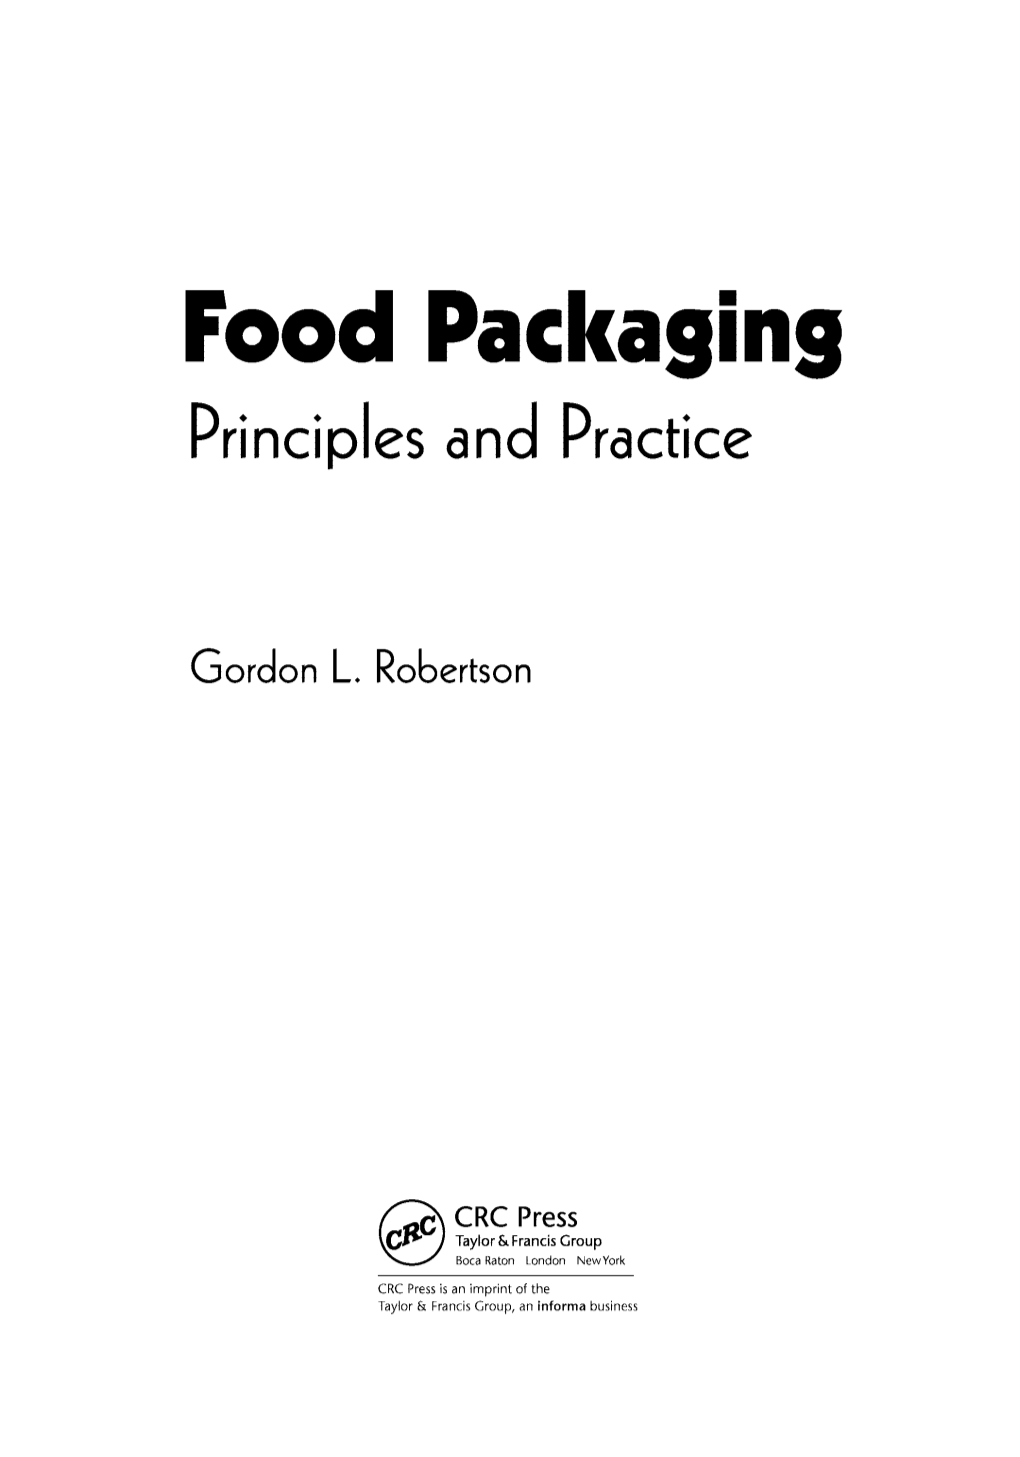 Food Packaging – Principles and Practice, Third Edition